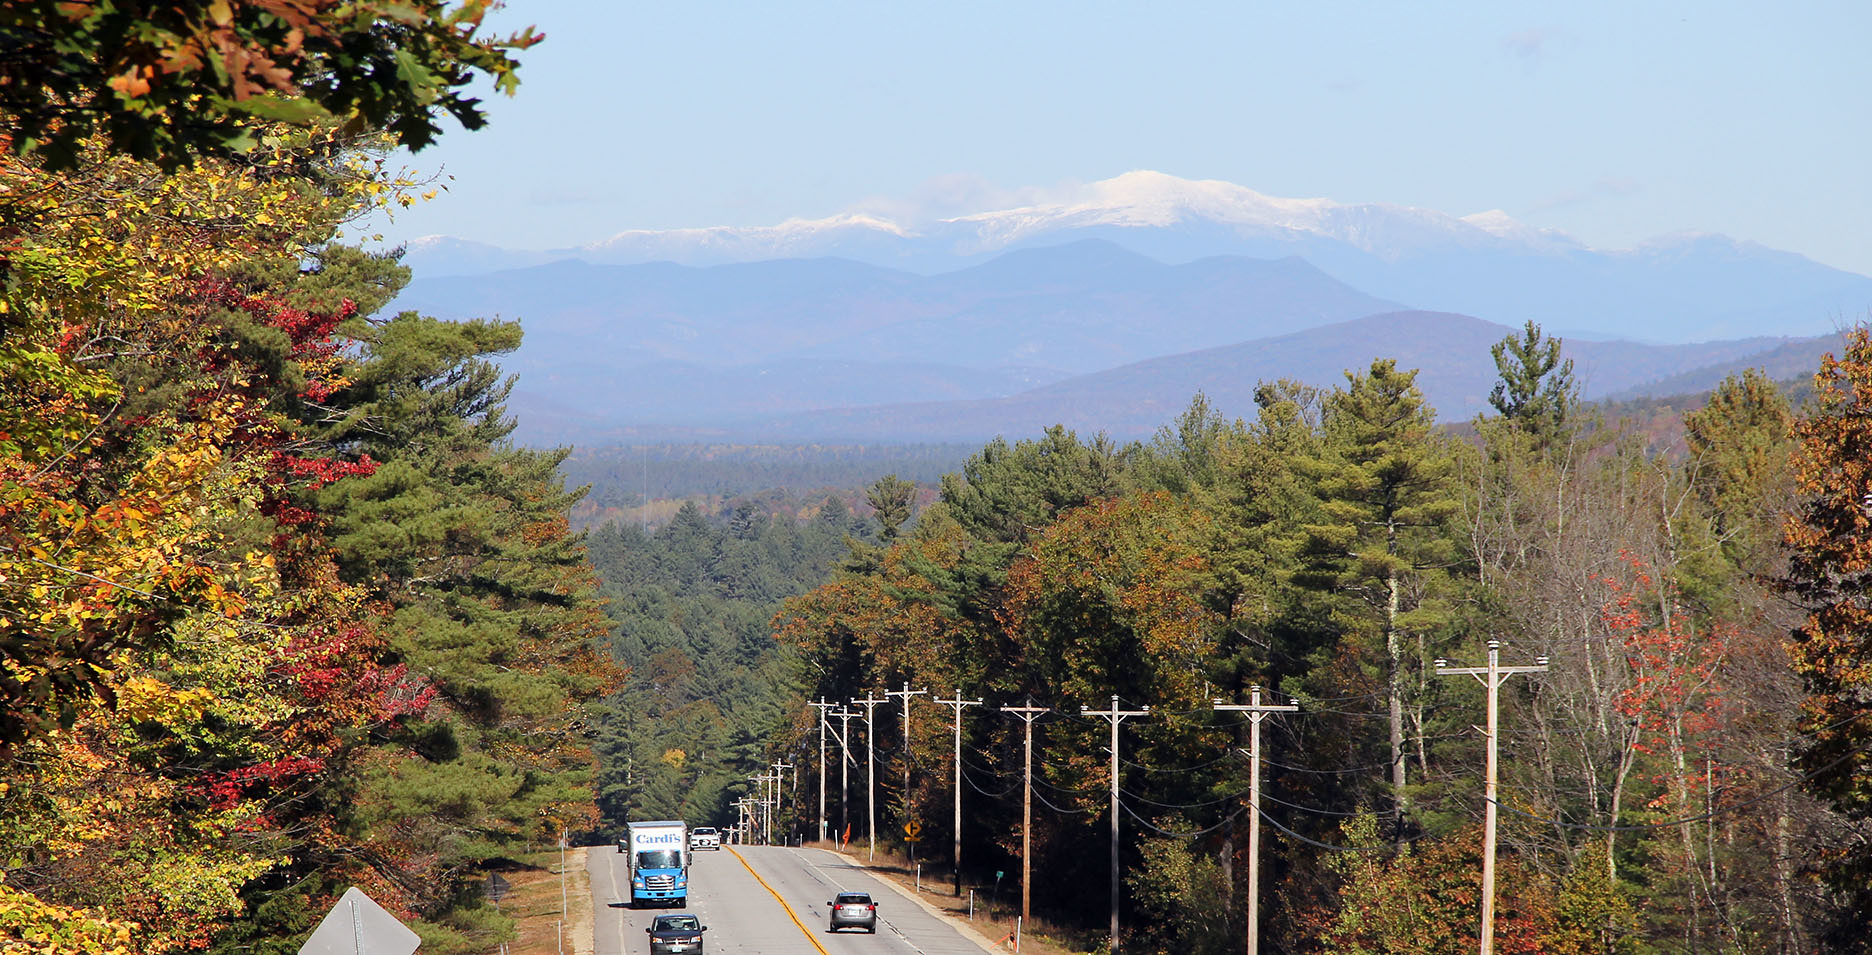 Landscape photo of Mt Washington with highway in the foreground